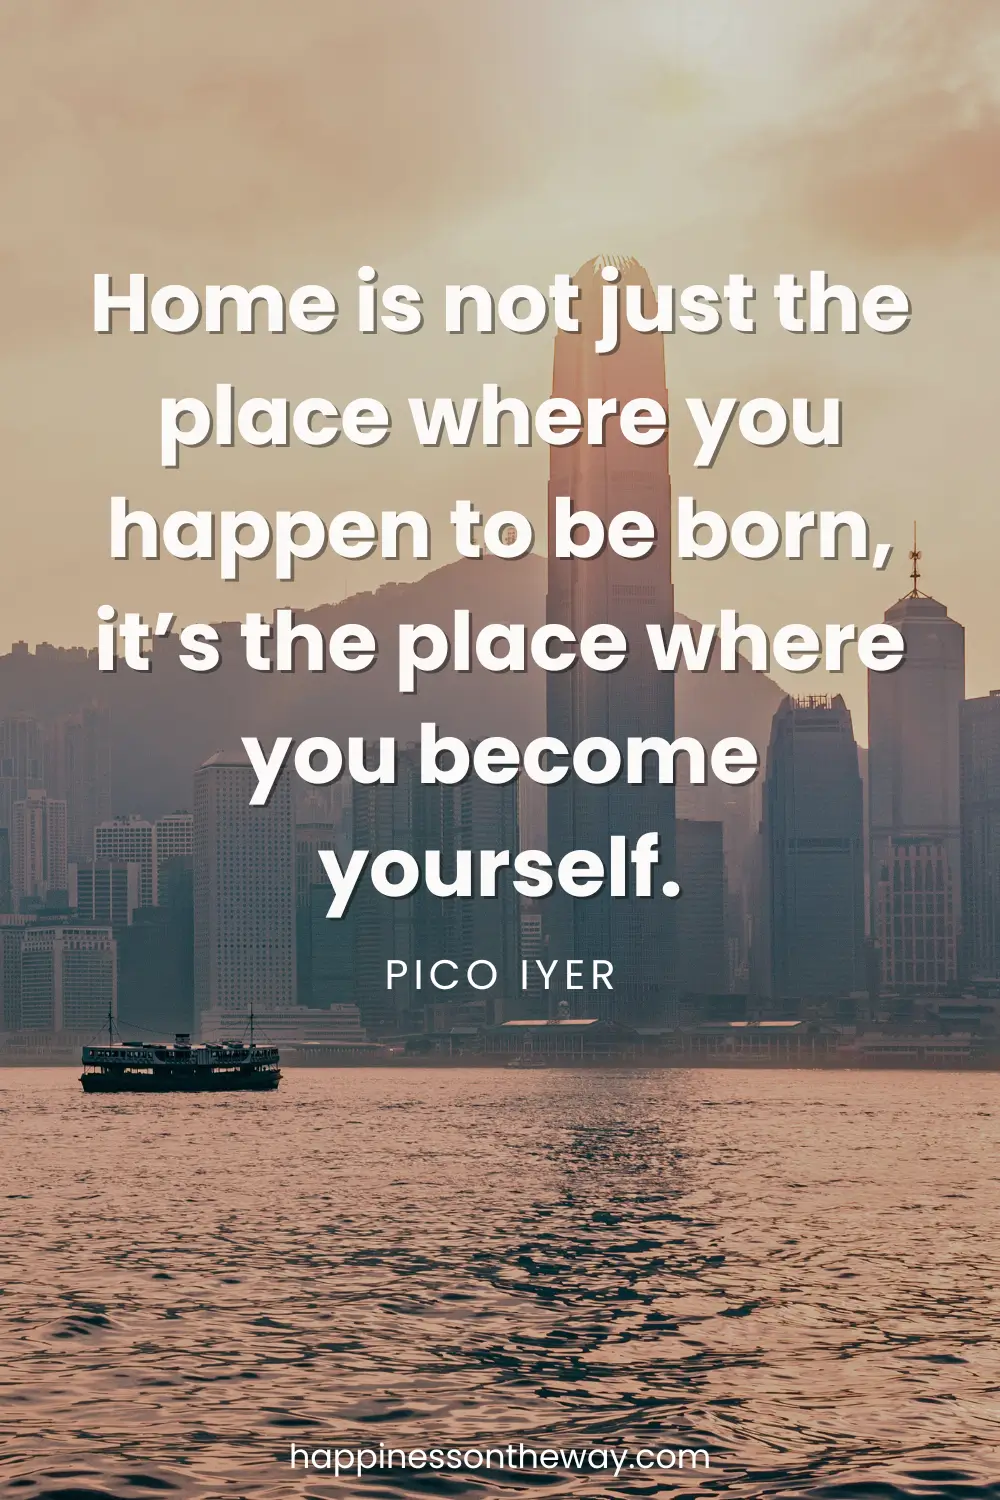 The skyline of Hong Kong with a boat and an inspiring quote, "Home is not just the place where you happen to be born, it’s the place where you become yourself" by – Pico Iyer